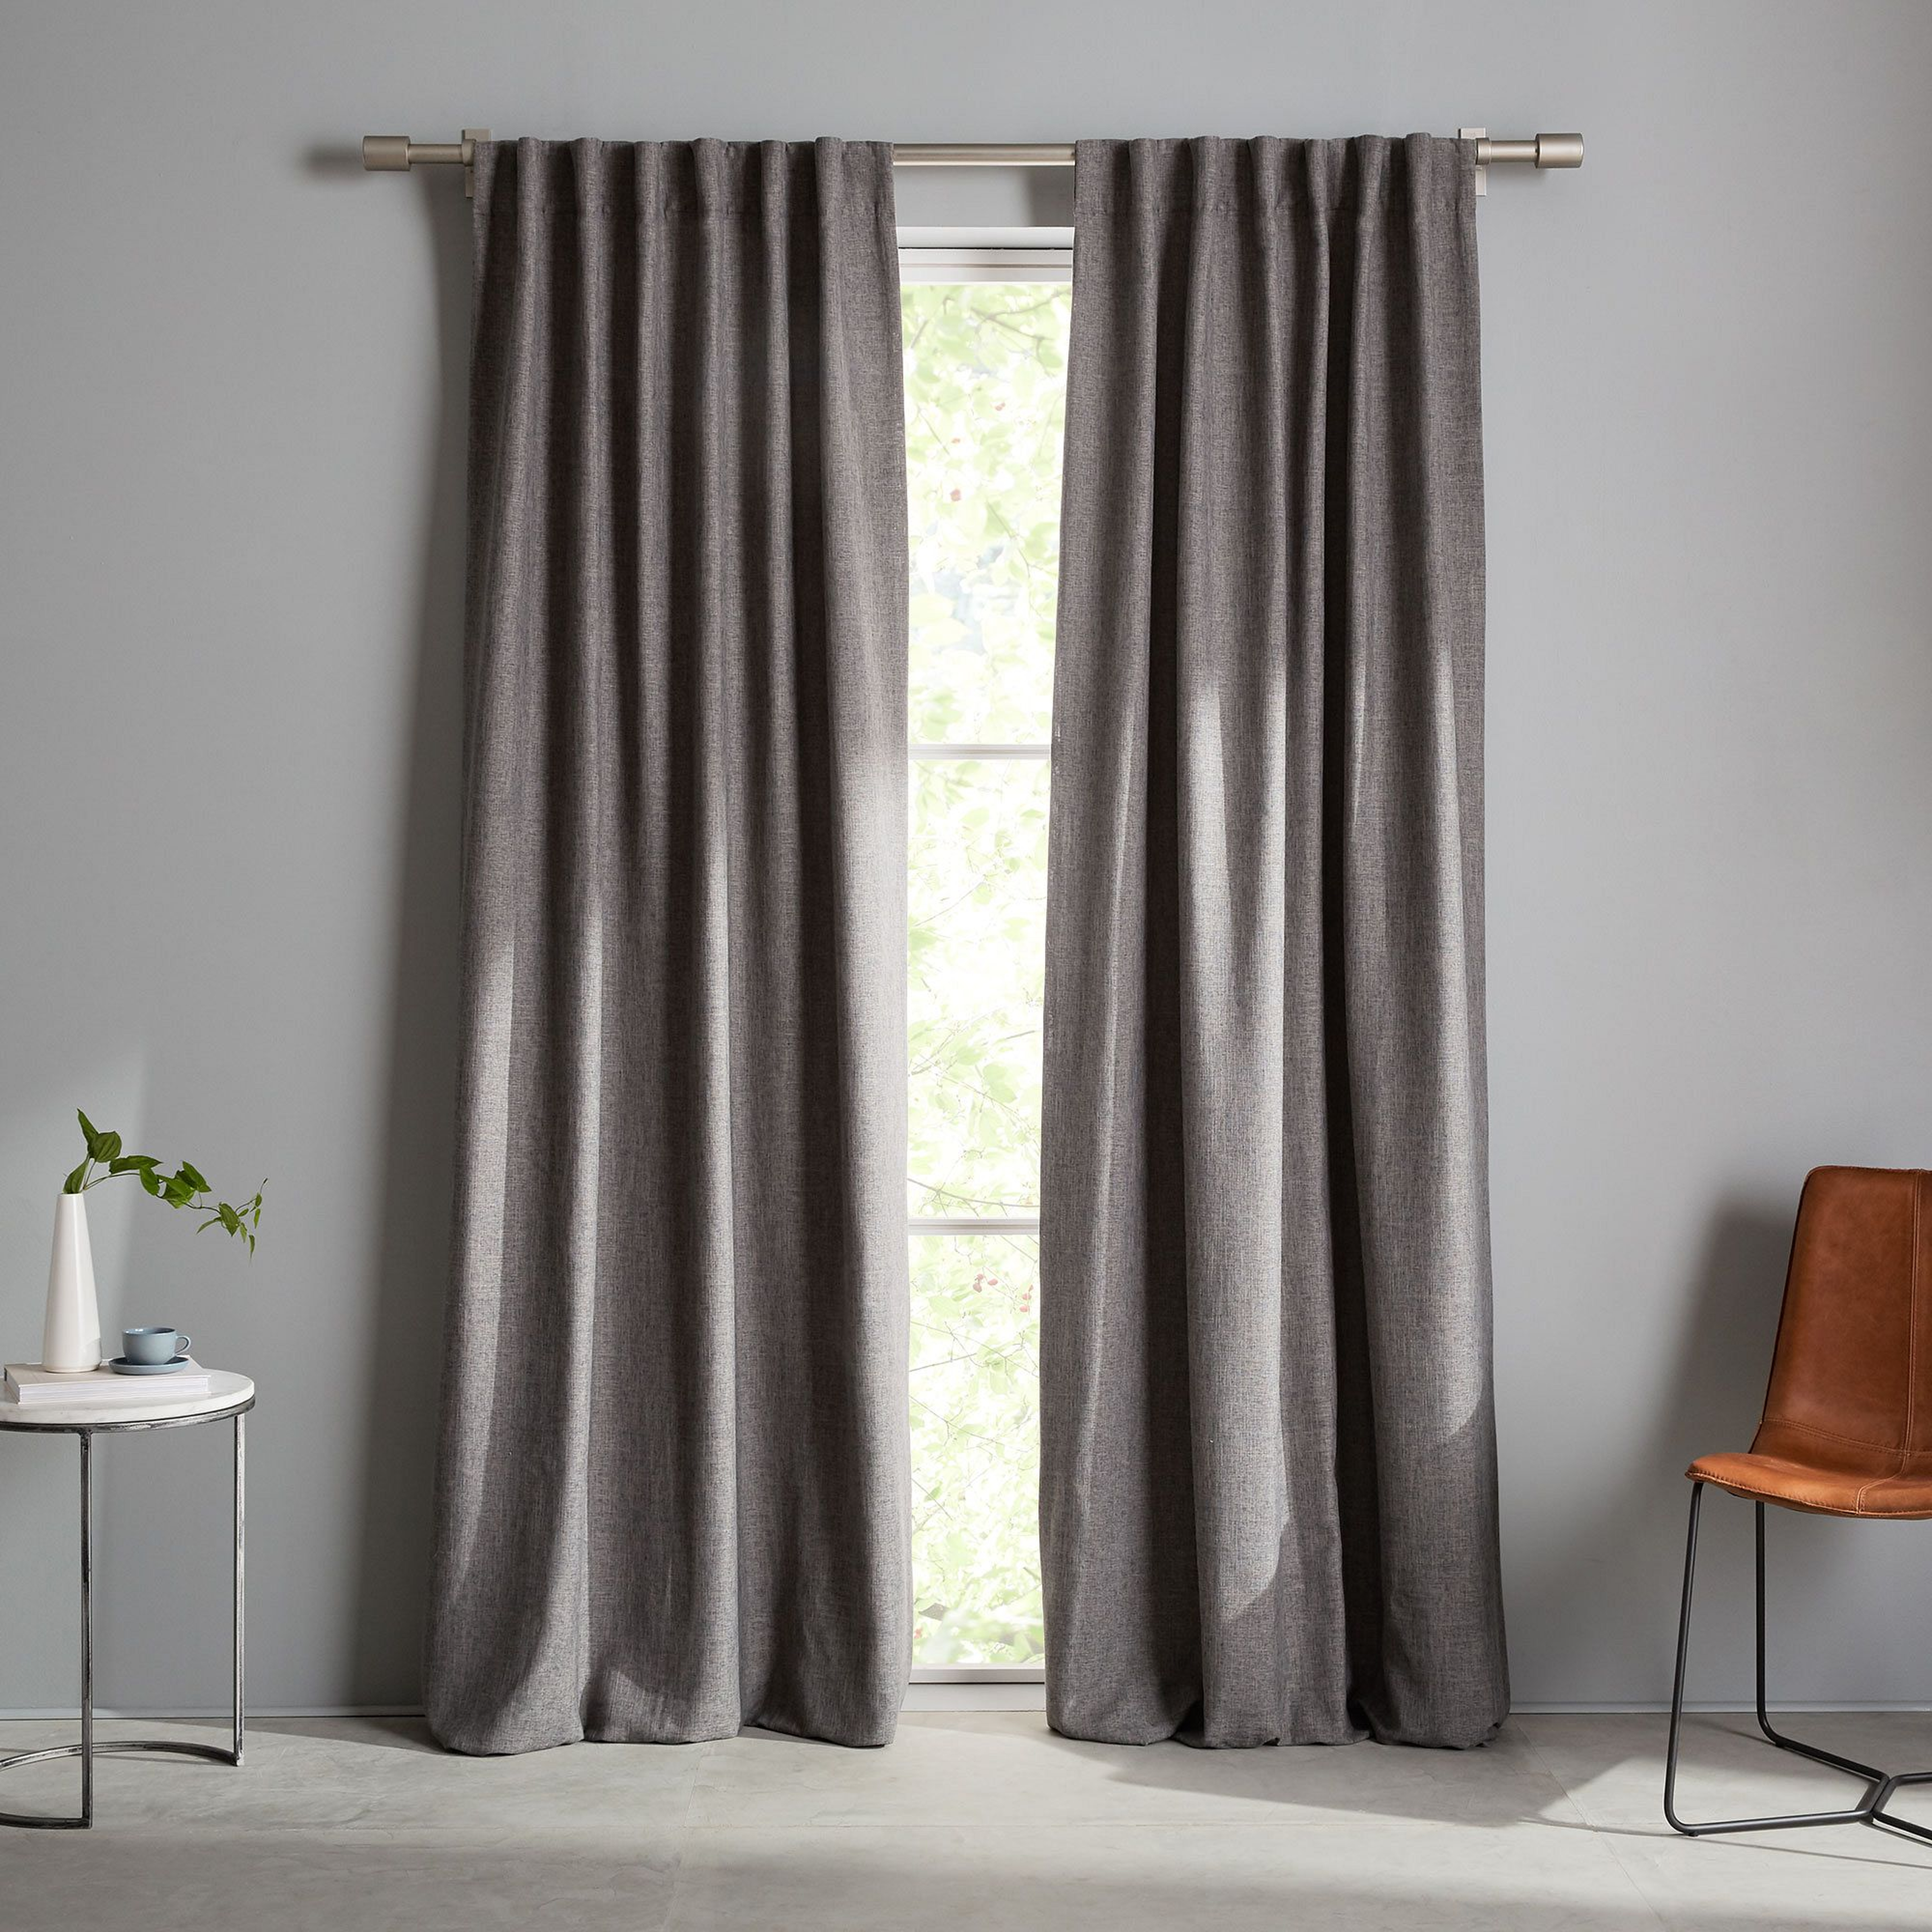 Crossweave Curtain with Blackout Lining, Charcoal, 48"x96", Set of 2 - West Elm